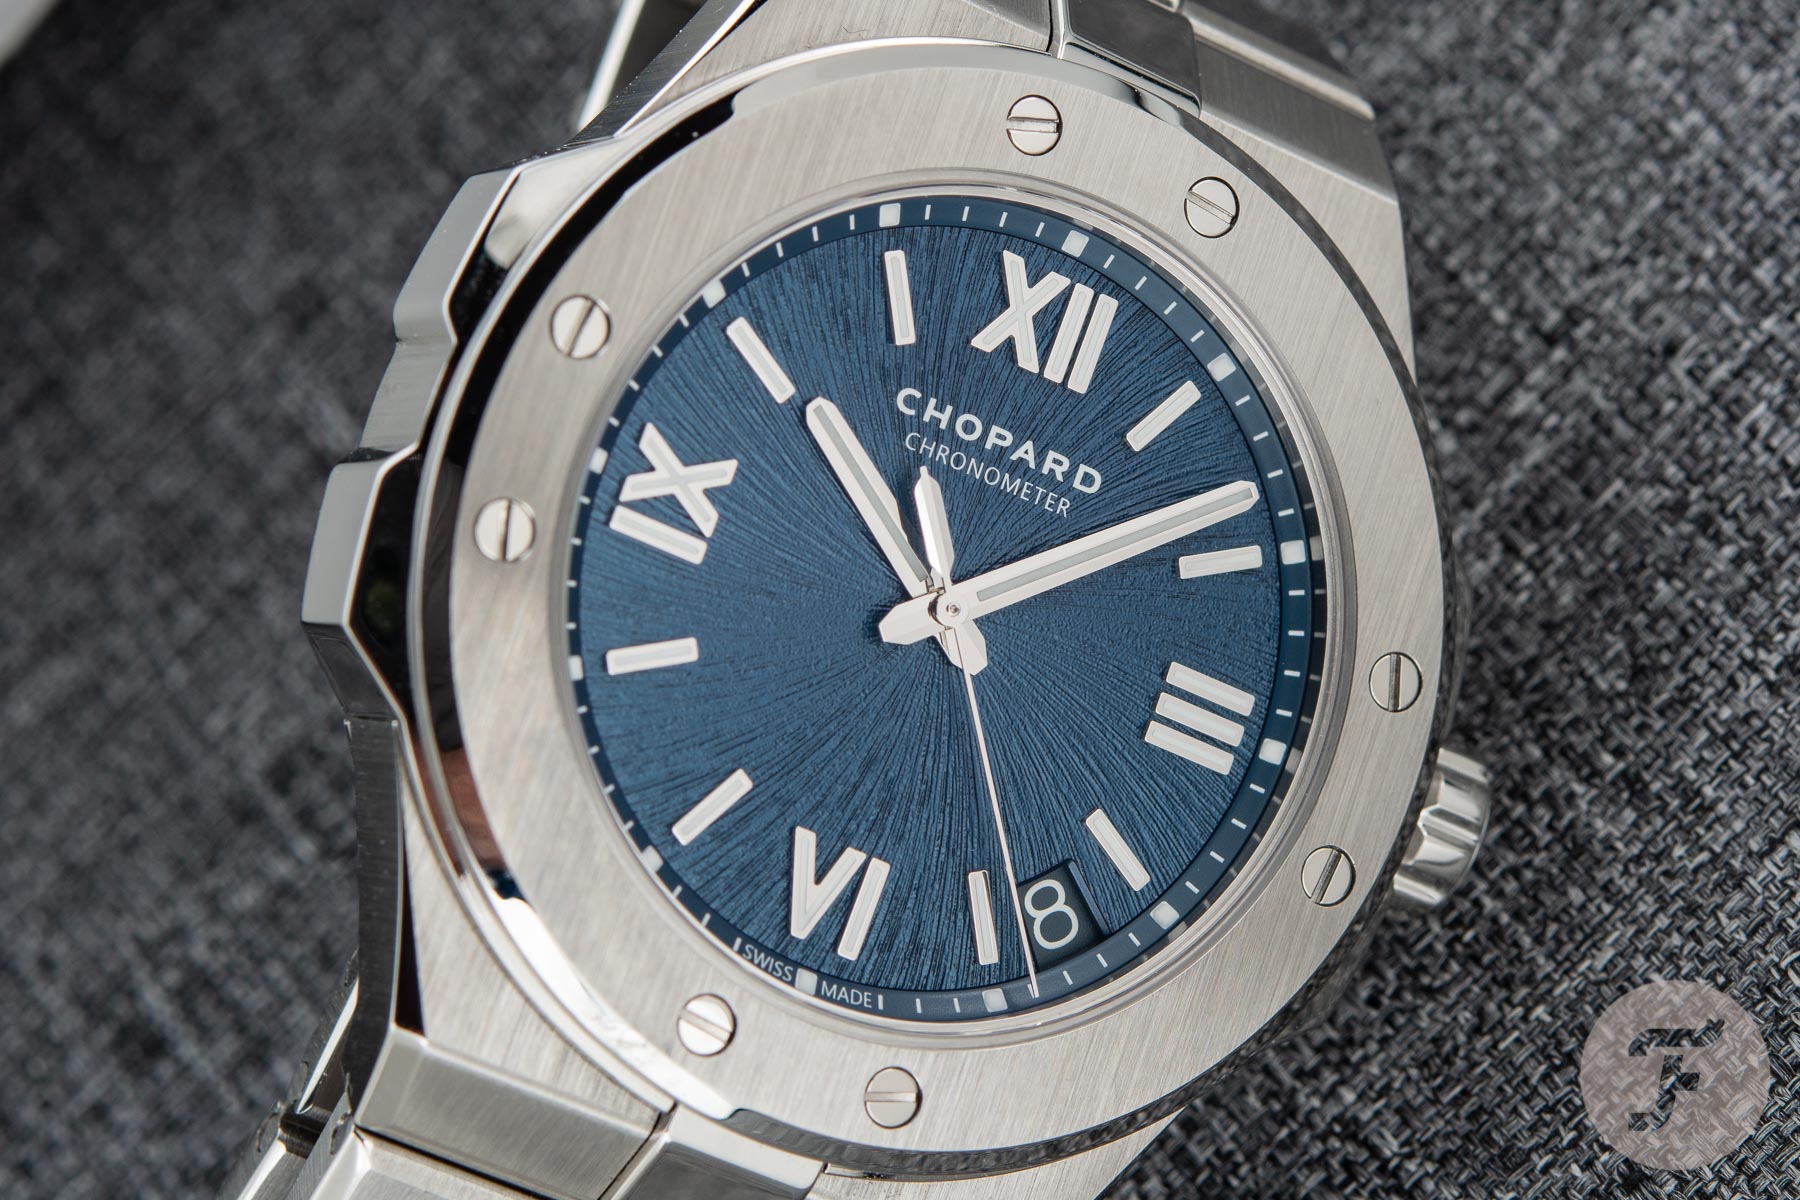 Chopard Alpine Eagle Maritime Blue for $23,367 for sale from a Seller on  Chrono24